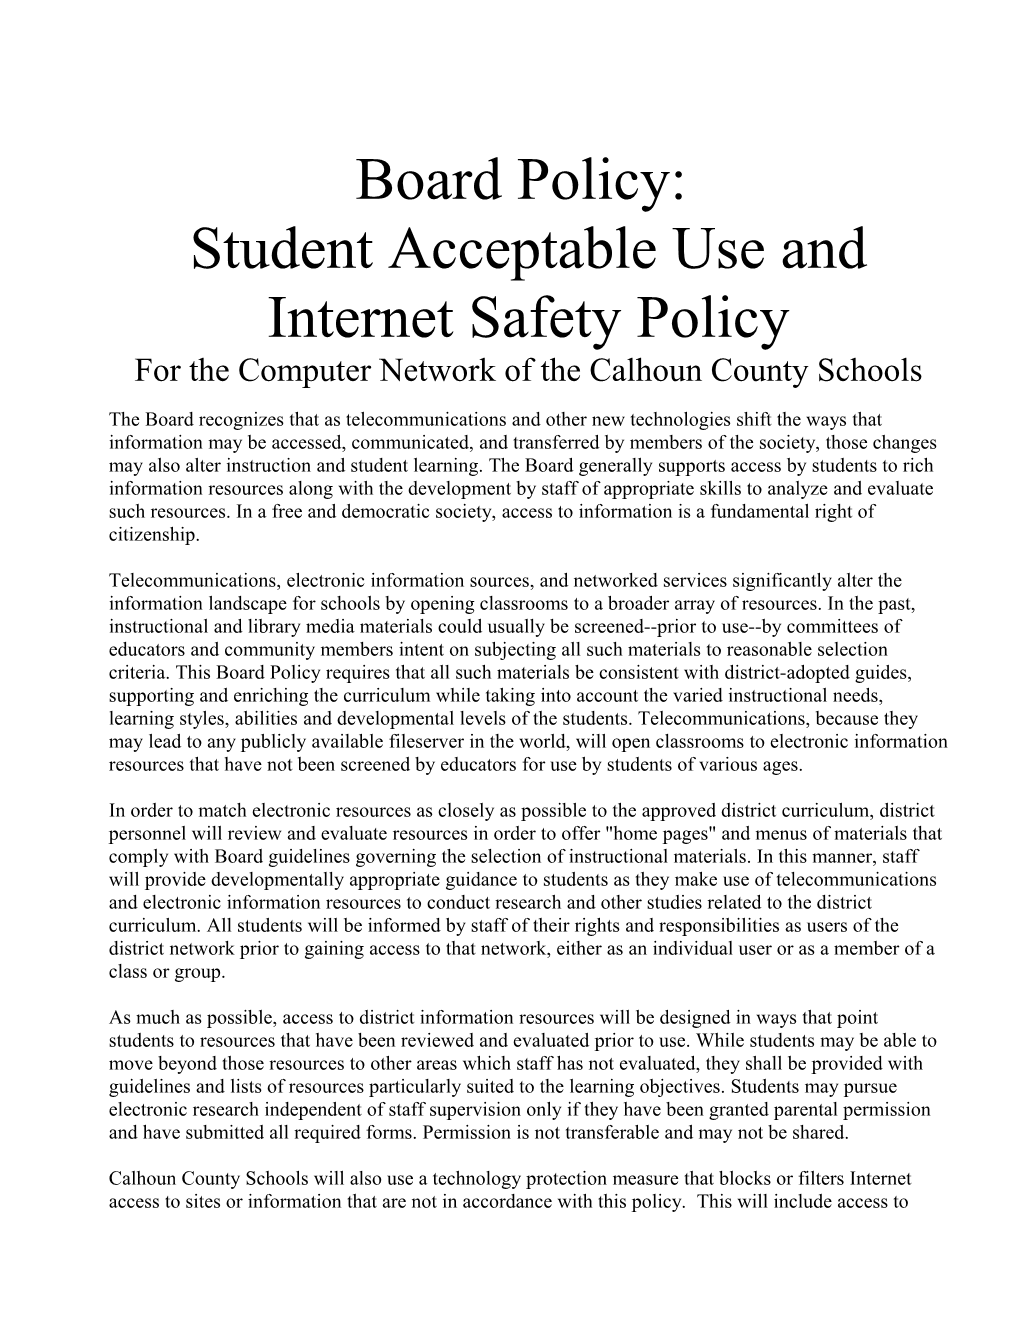 Board Policy: Copyright Compliance